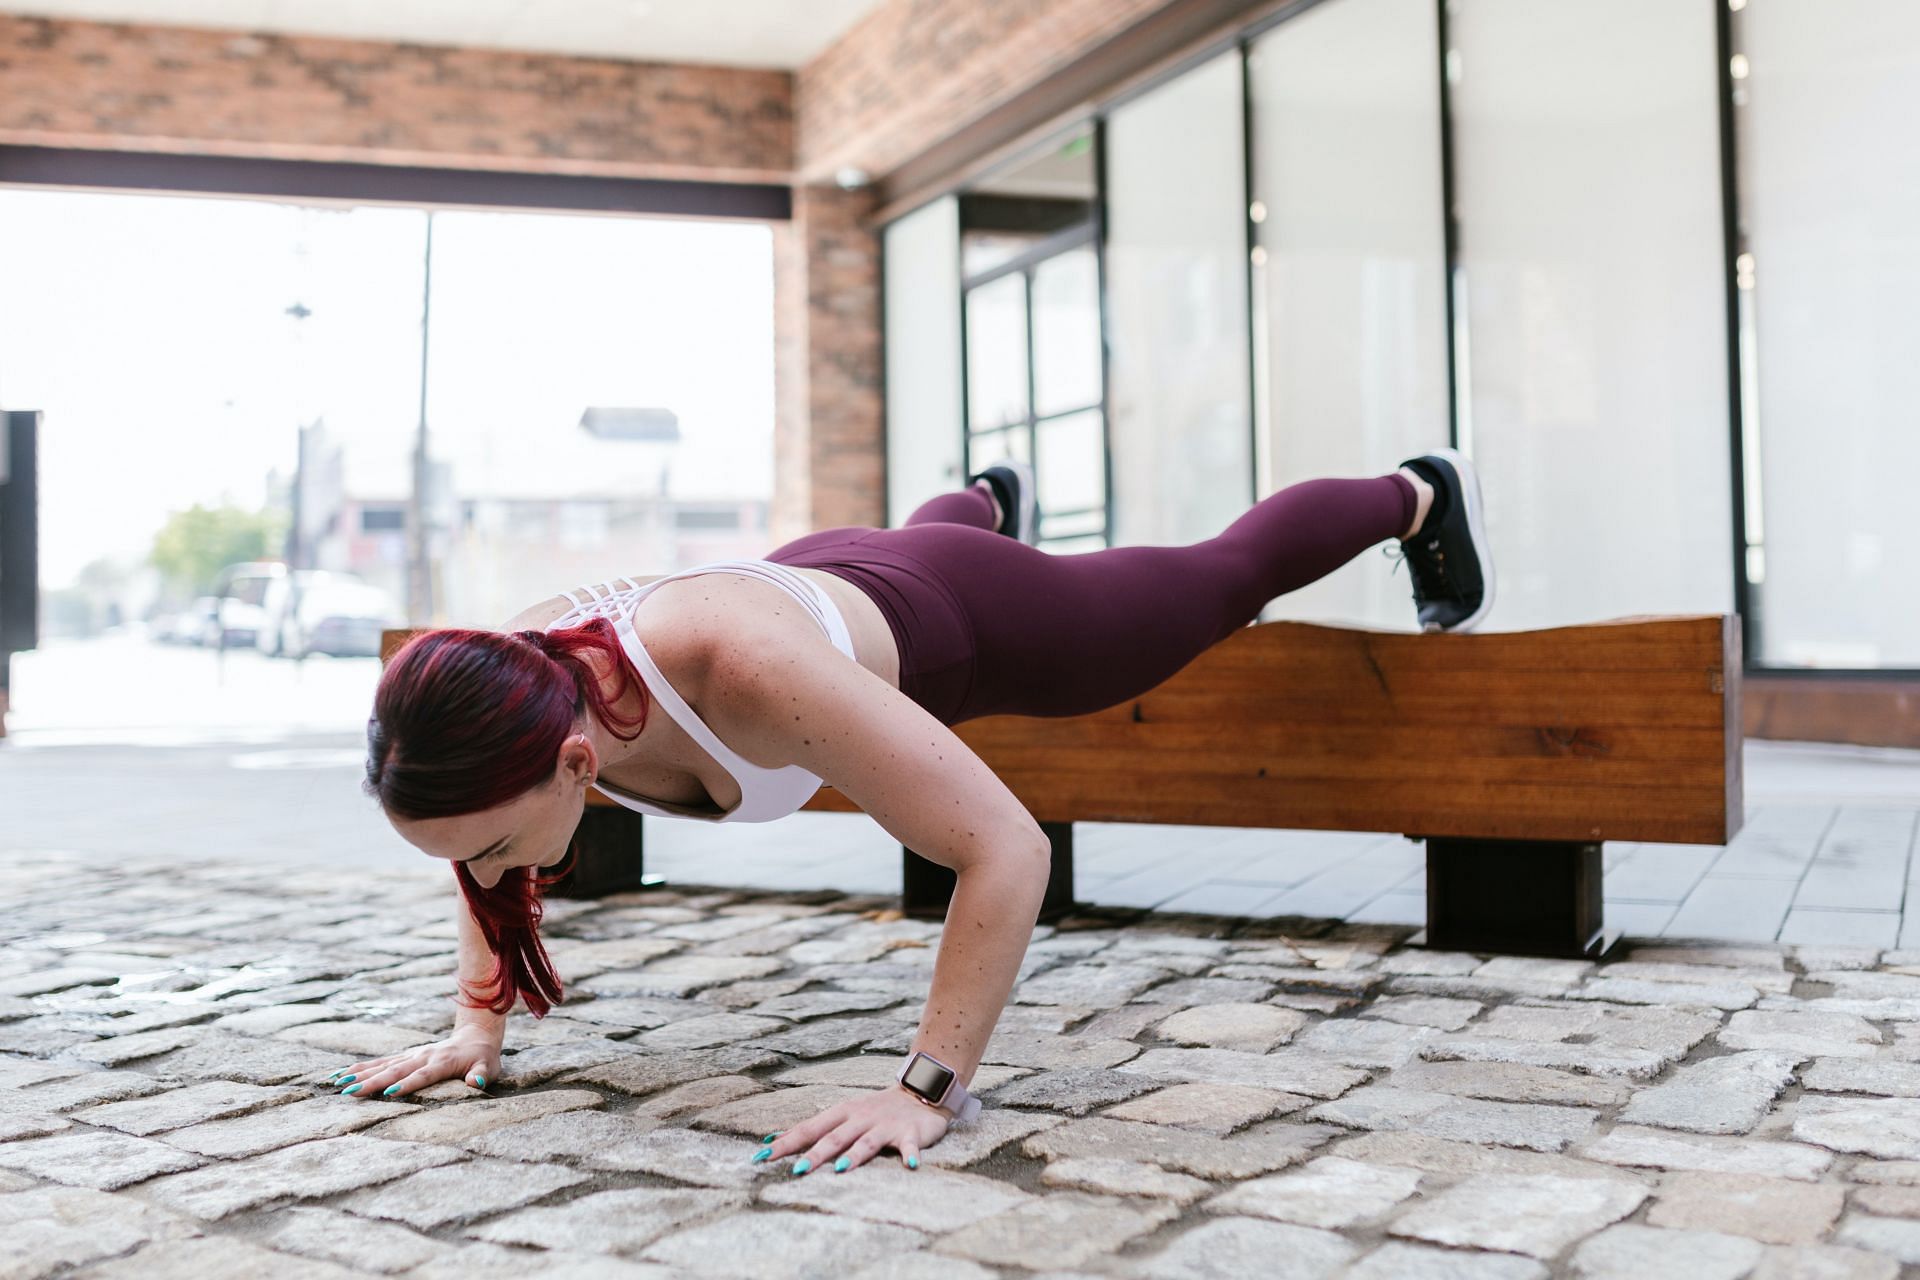 The decline push-up is a more challenging take on the classic push-up! (Image via pexels/Rodnae Productions)